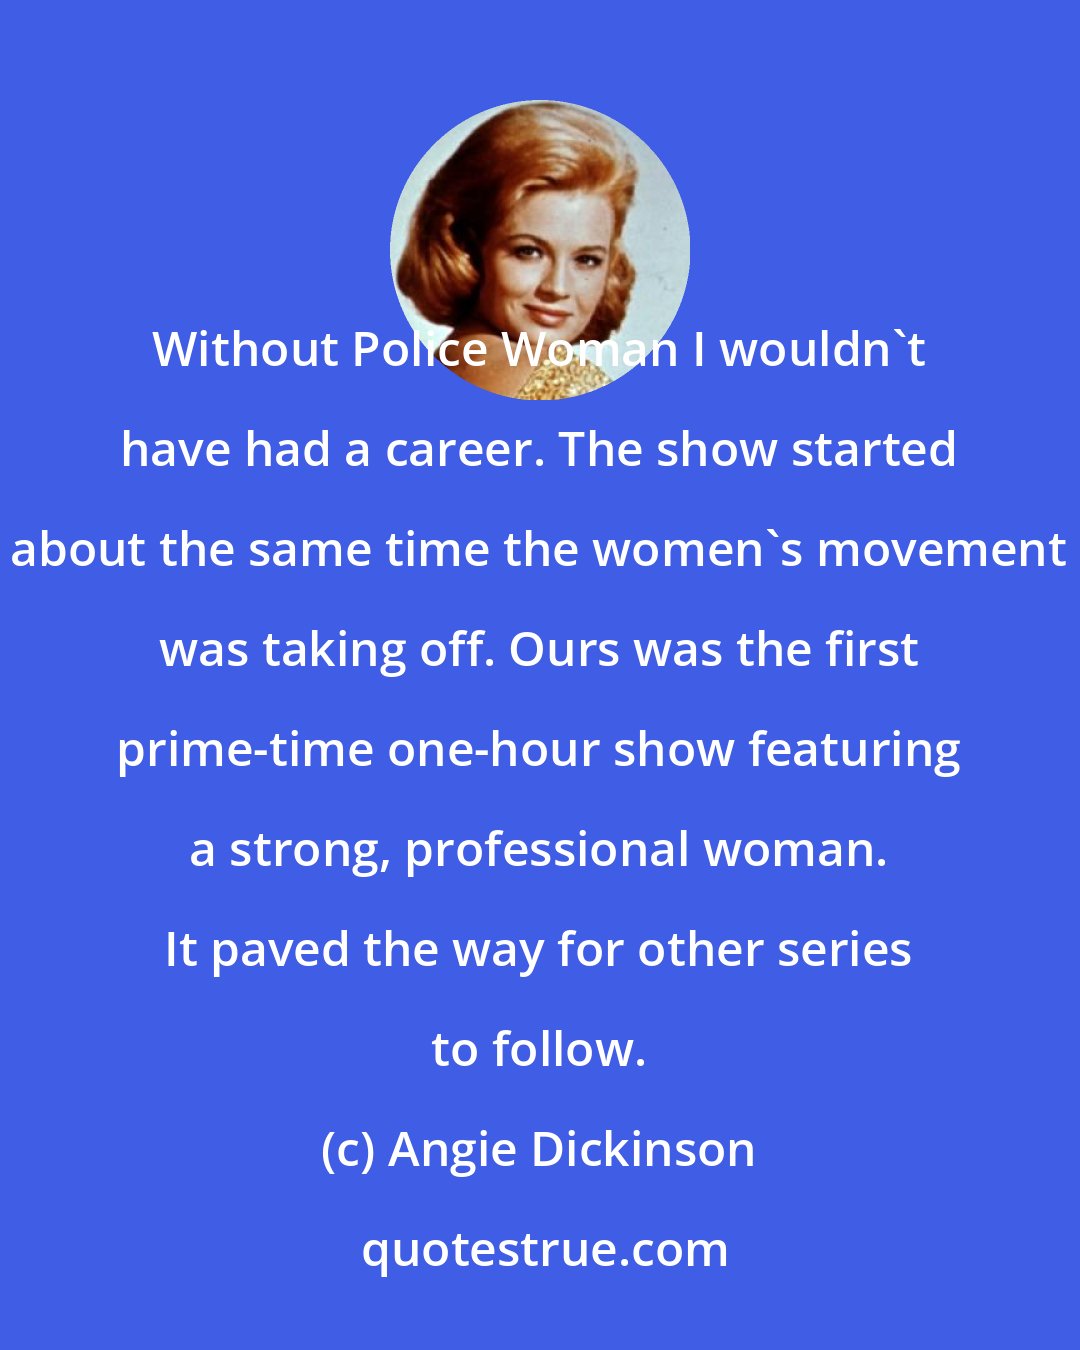 Angie Dickinson: Without Police Woman I wouldn't have had a career. The show started about the same time the women's movement was taking off. Ours was the first prime-time one-hour show featuring a strong, professional woman. It paved the way for other series to follow.